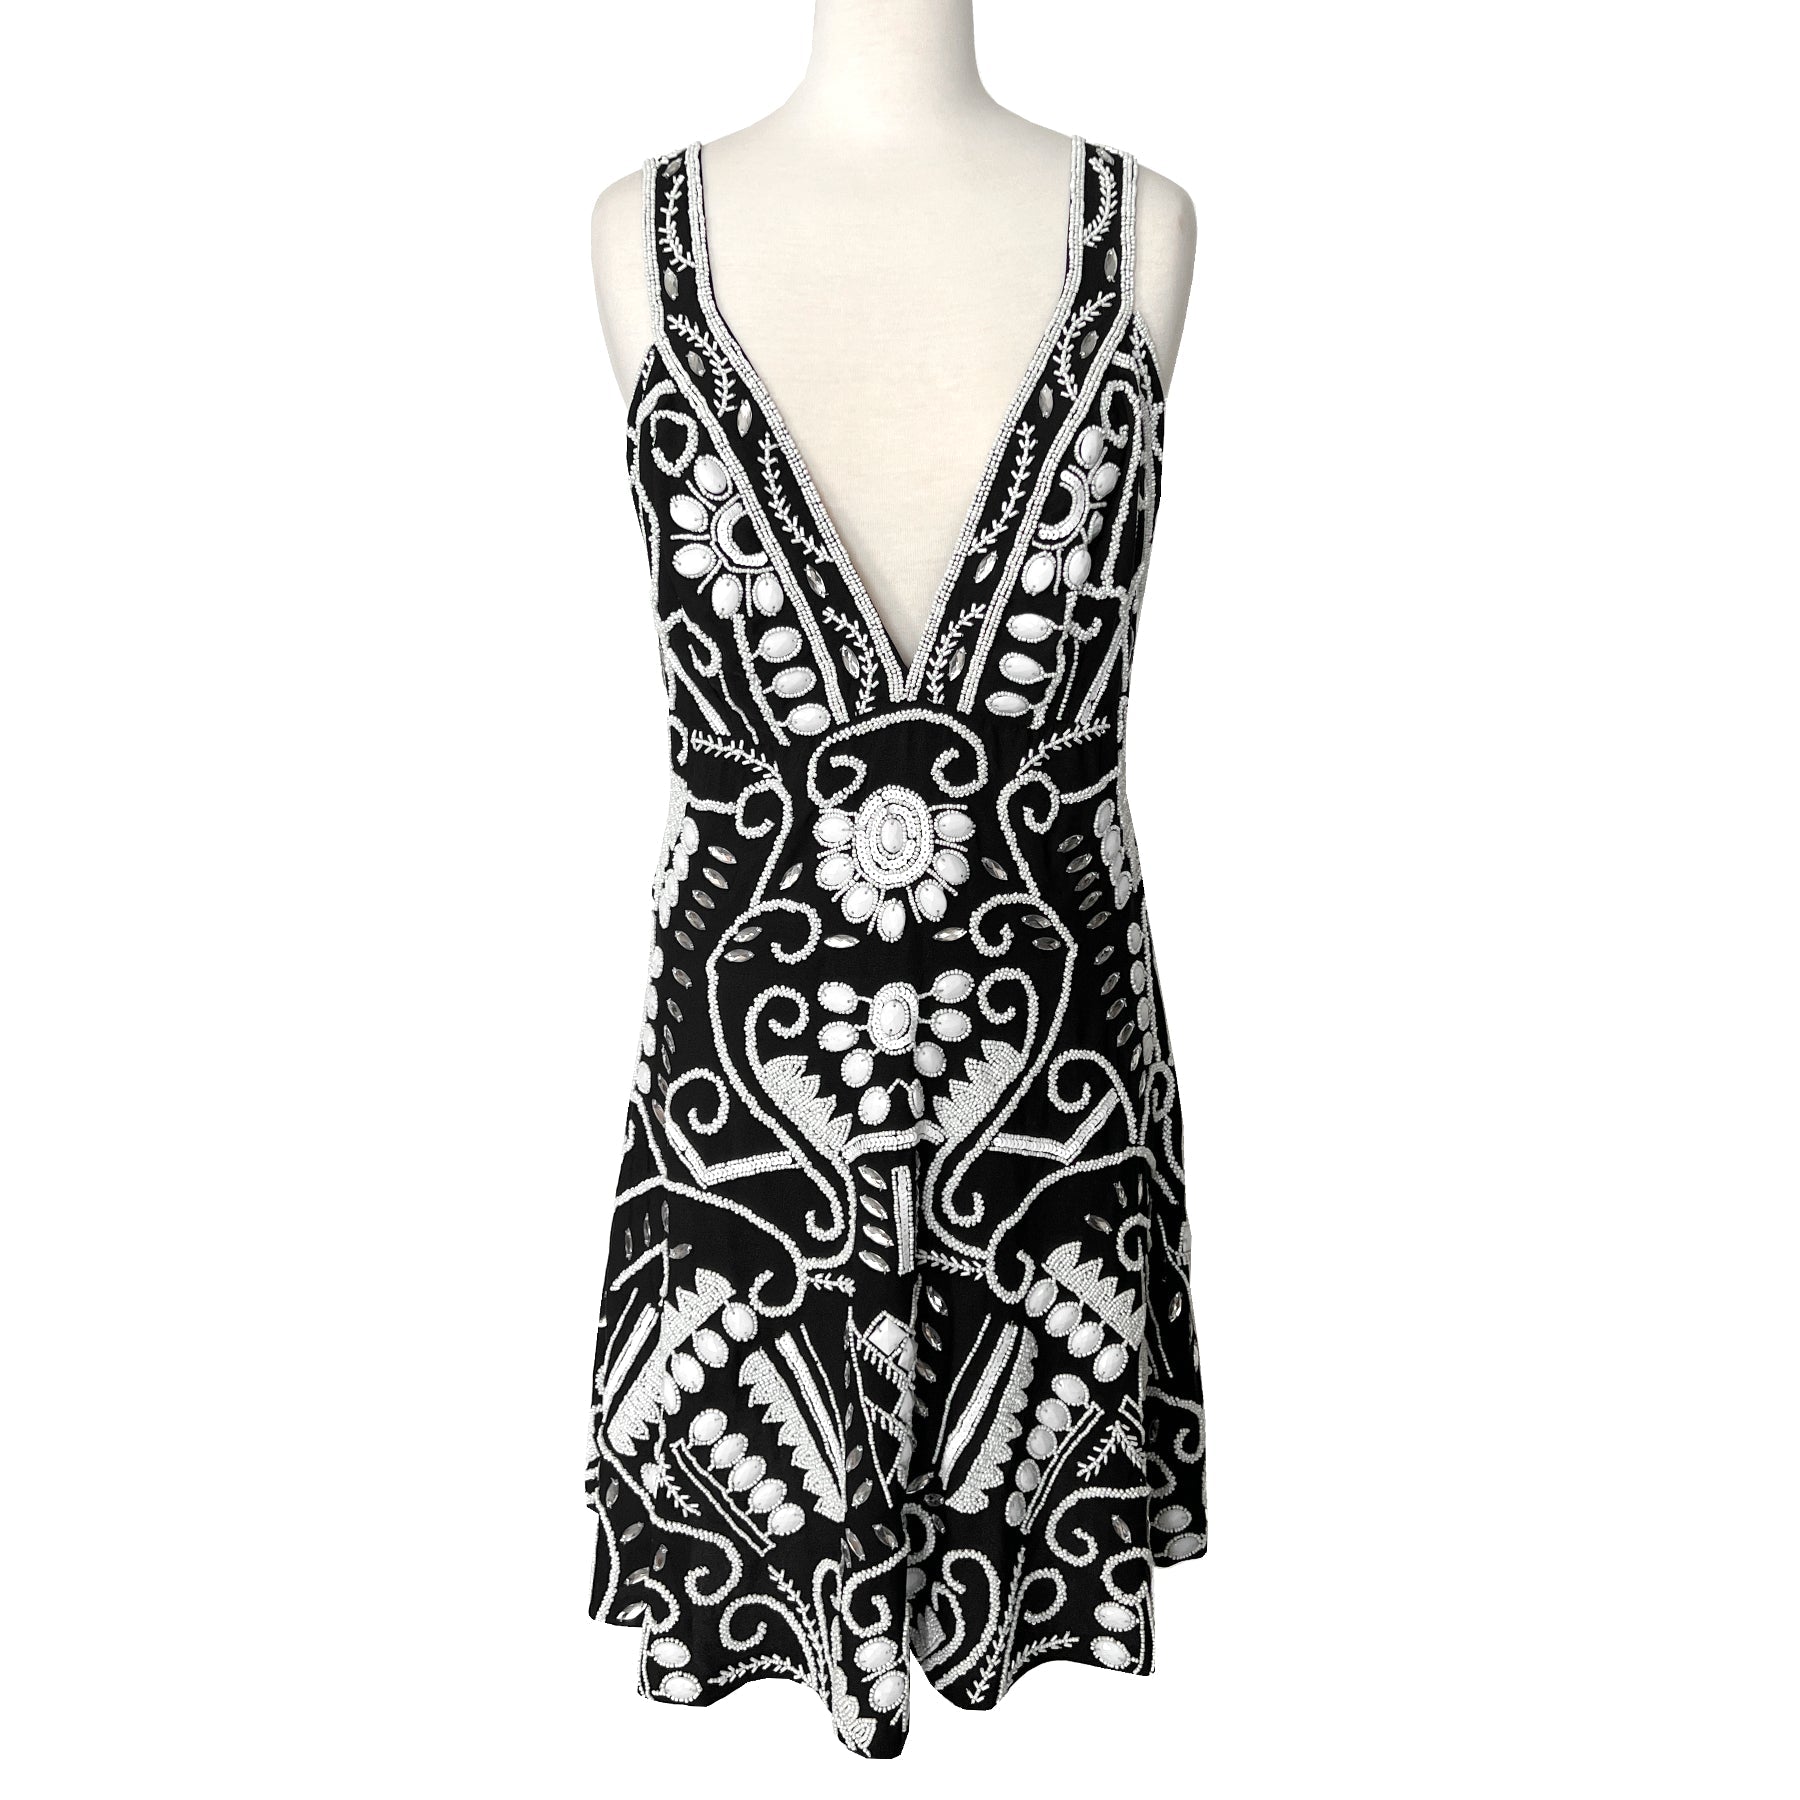 Alexis Jerza Black and White Embellished Embroidered Jeweled Beaded Mini Dress